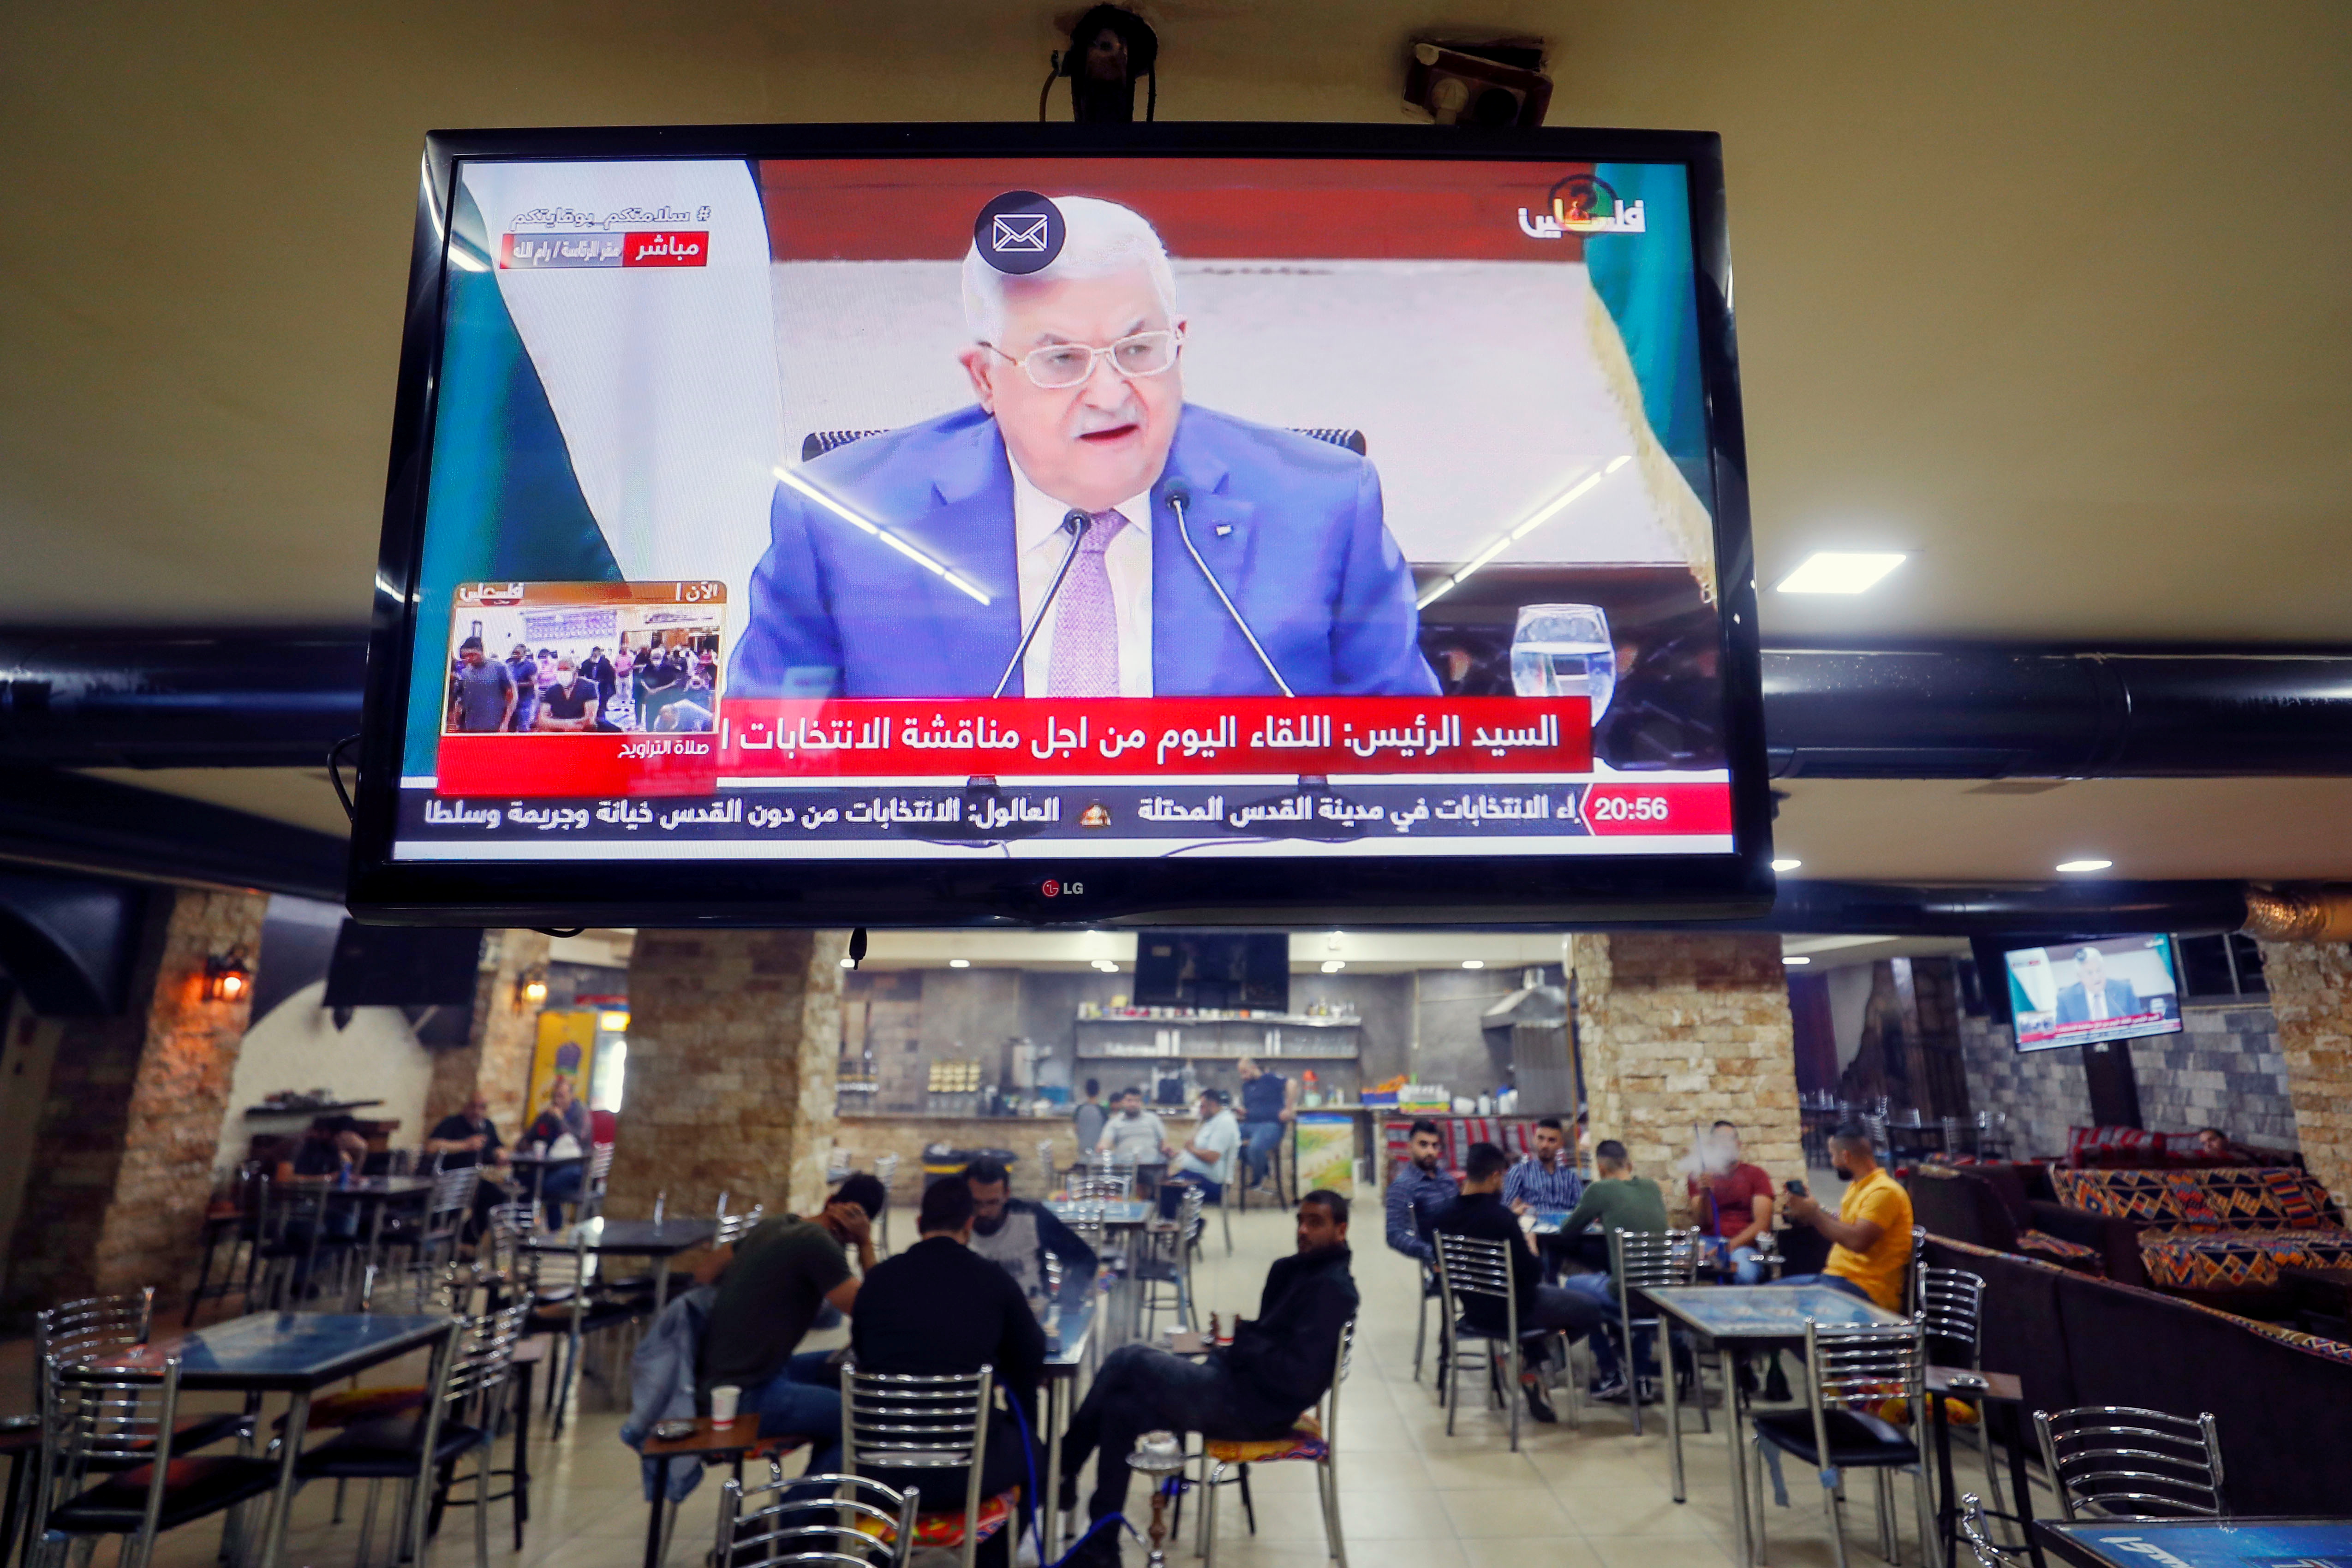 A screen displaying a live broadcast of Palestinian President Mahmoud Abbas's speech during a meeting to discuss upcoming elections, is seen in a coffee shop in Ramallah in the Israeli-occupied West Bank April 29, 2021. REUTERS/Mohamad Torokman